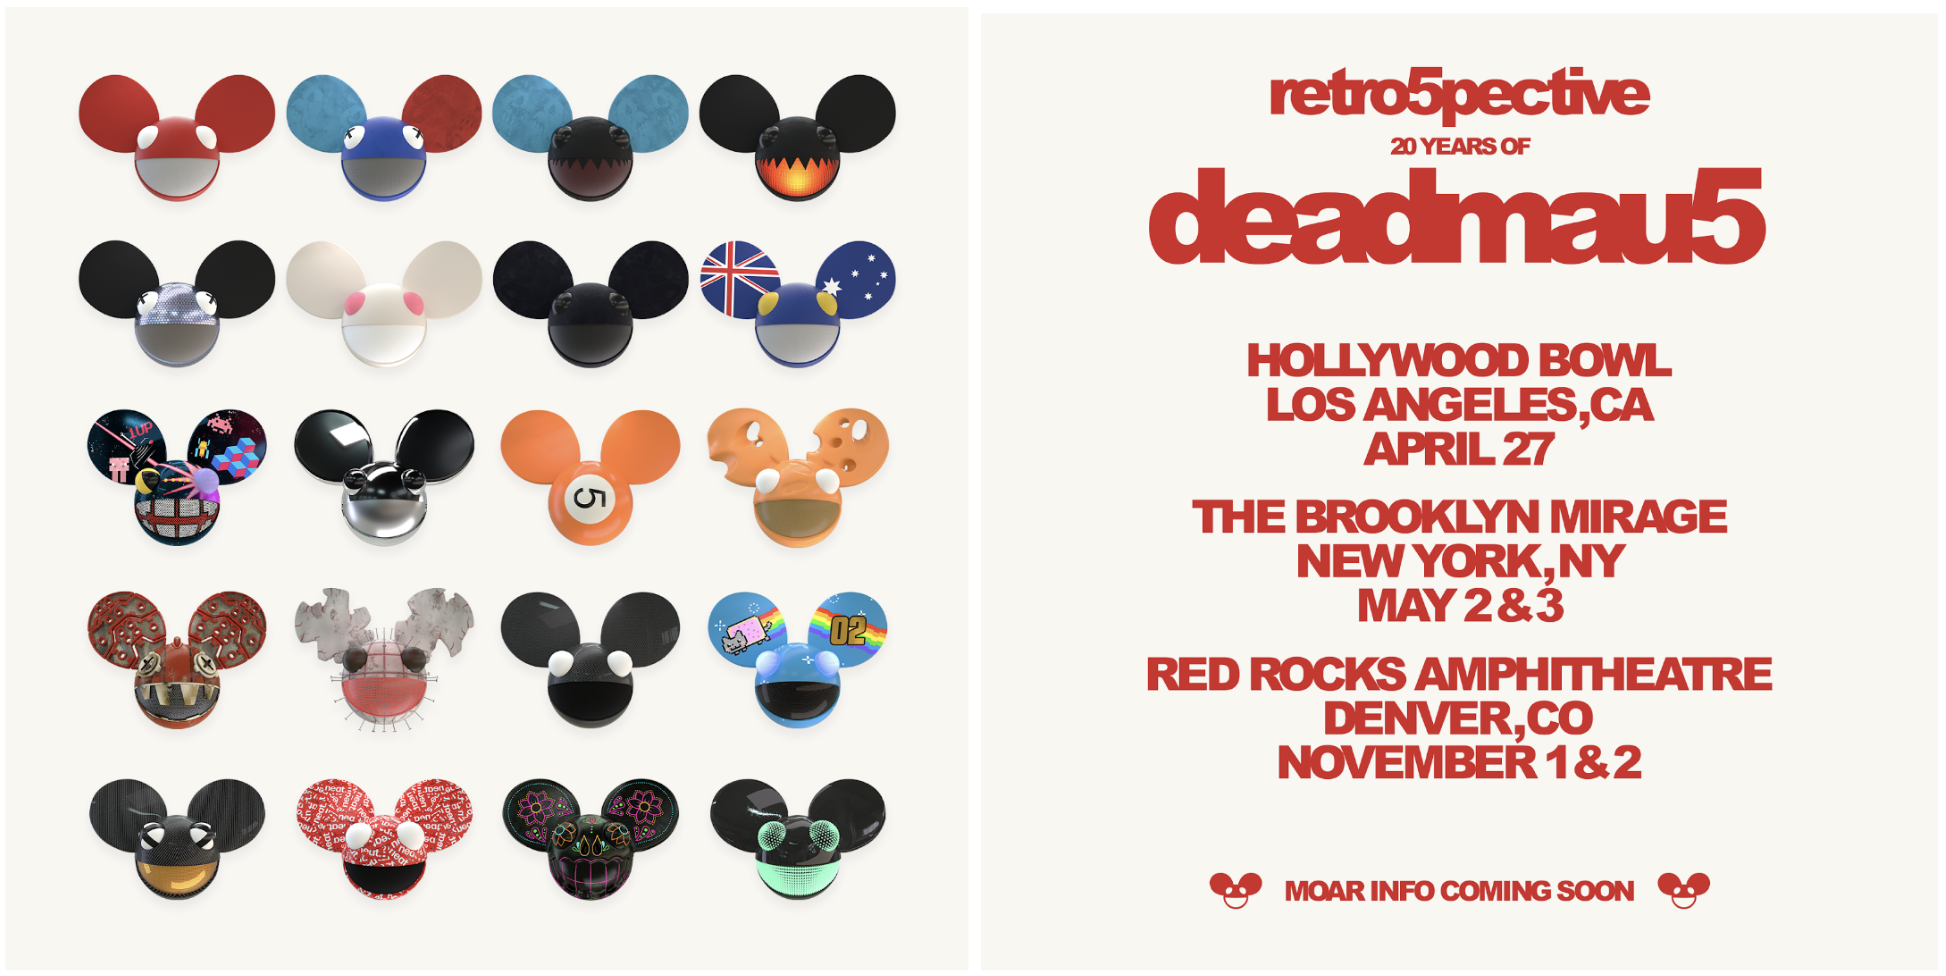 Announcing 'retro5pective: 20 years of deadmau5' Shows